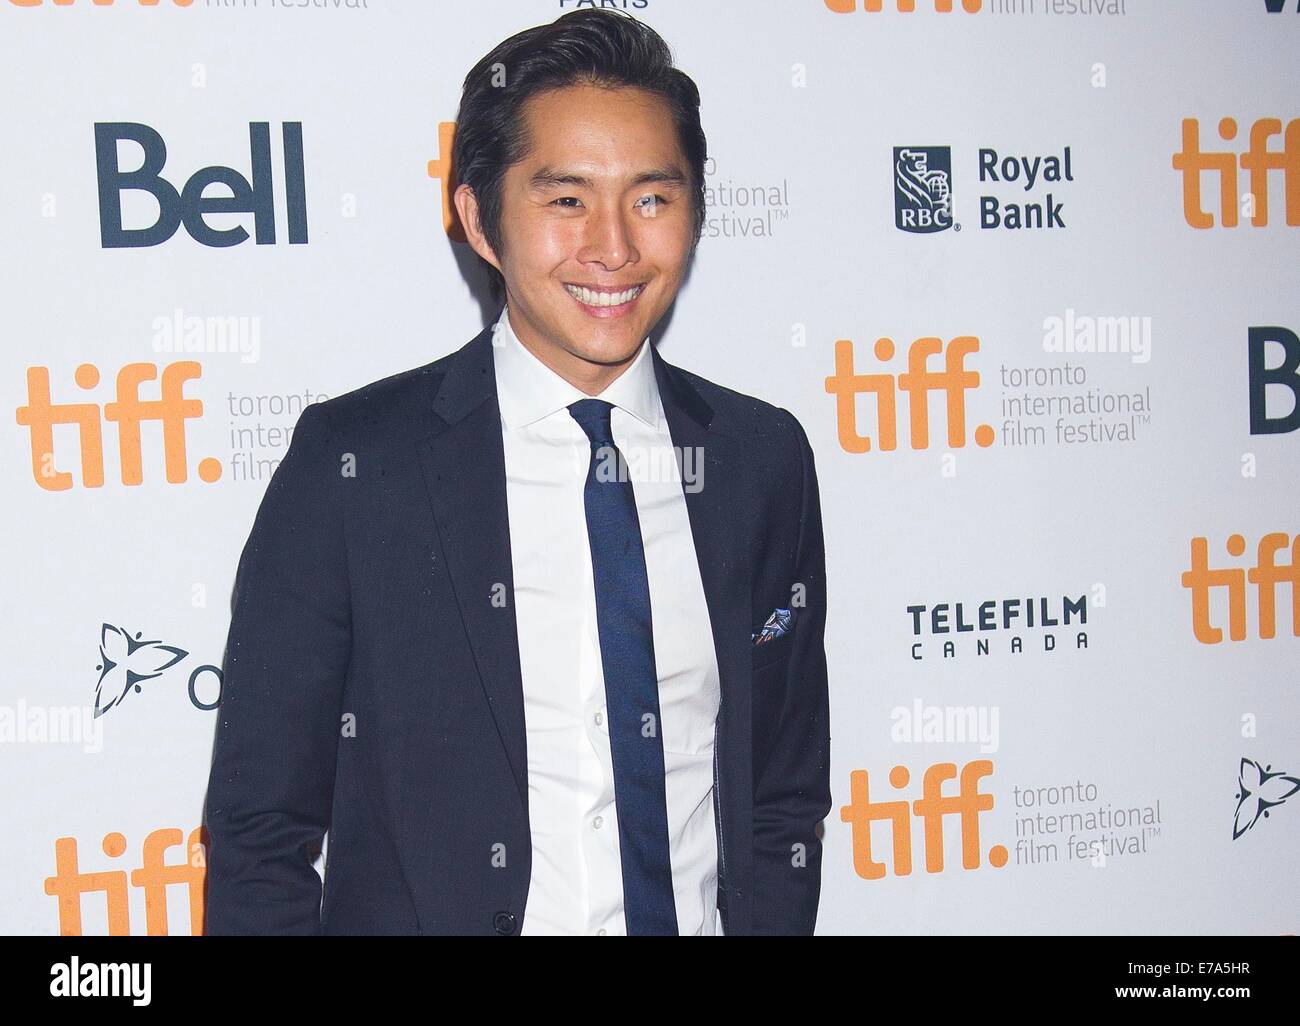 Toronto, Canada. 10th Sep, 2014. Actor Justin Chon poses for photos before the world premiere of the film "Revenge of The Green Dragons" at Ryerson Theater during the 39th Toronto International Film Festival in Toronto, Canada, Sept. 10, 2014. Credit:  Zou Zheng/Xinhua/Alamy Live News Stock Photo